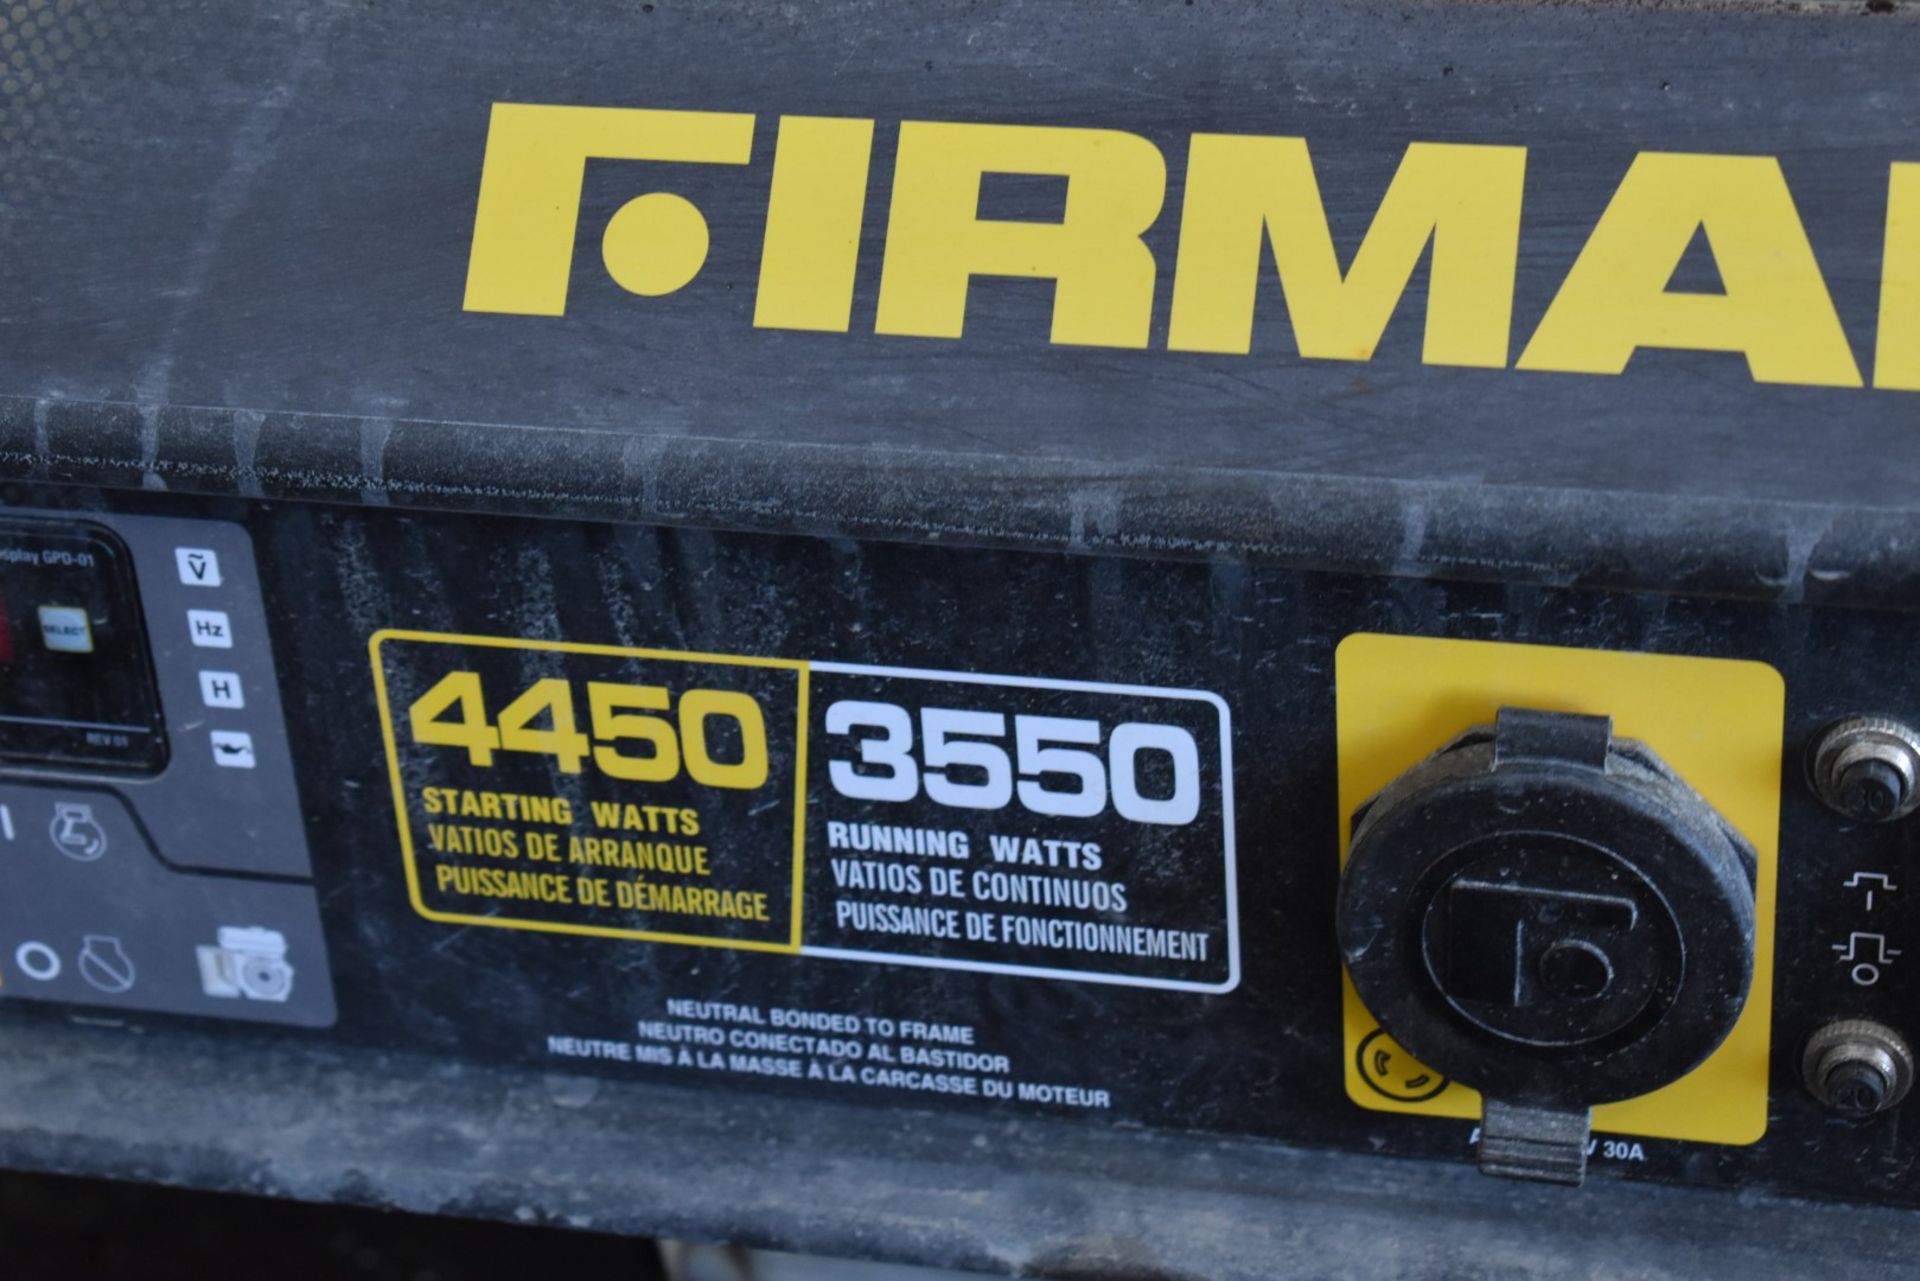 FIRMAN (2019) 3550 3,500W GAS POWERED GENERATOR WITH 120V/1PH/60HZ, S/N: 4902210352 - Image 2 of 4